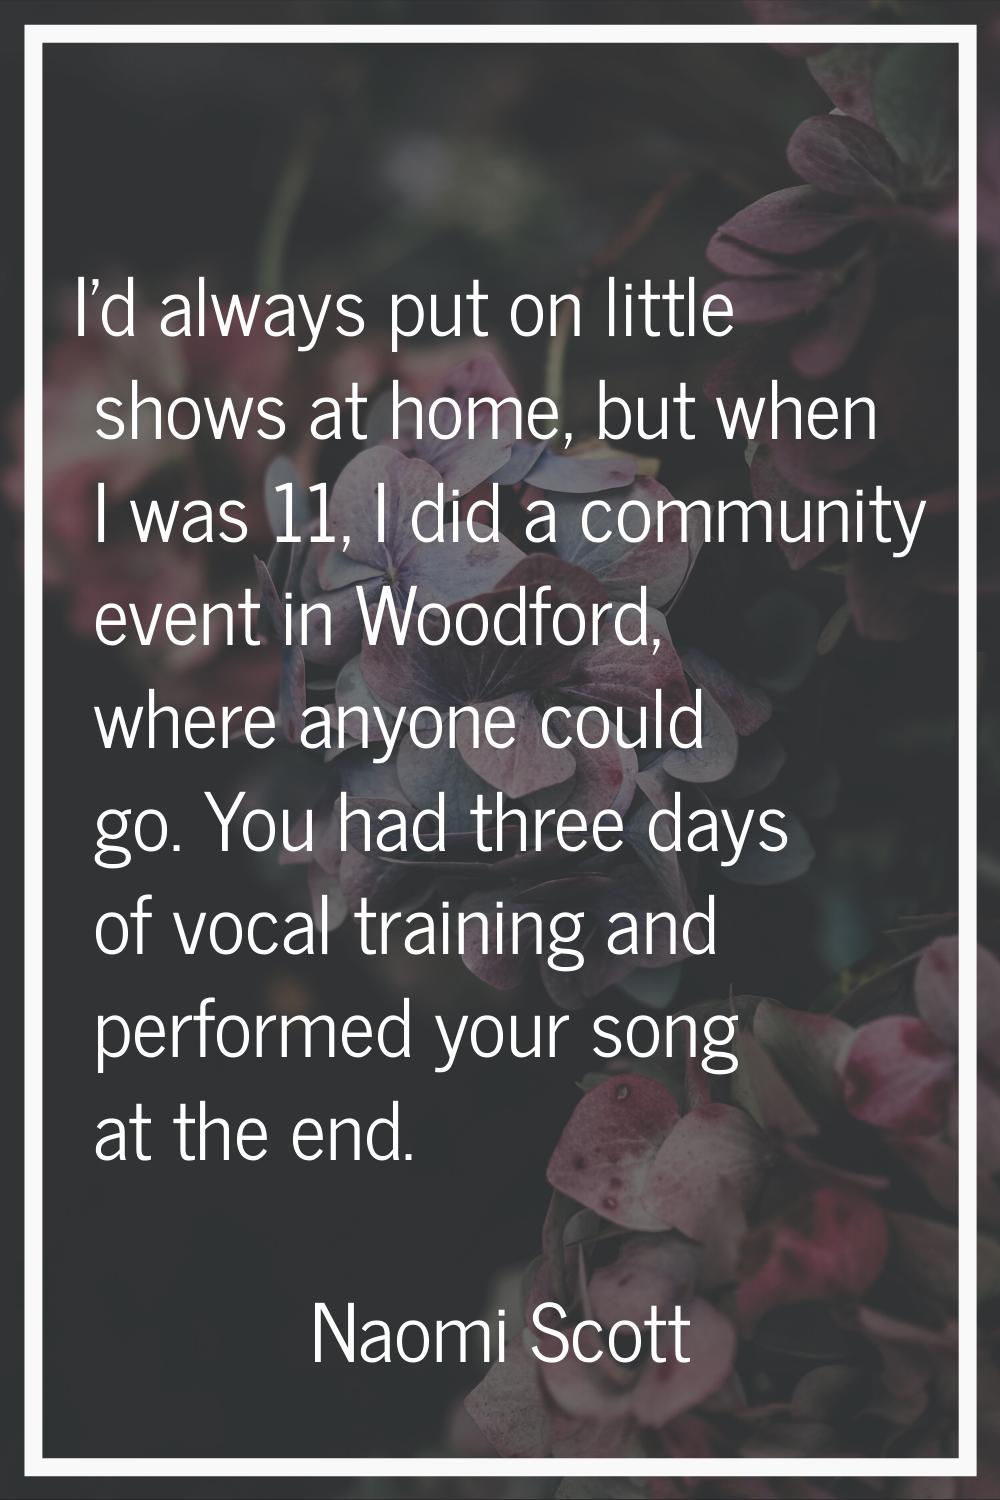 I'd always put on little shows at home, but when I was 11, I did a community event in Woodford, whe